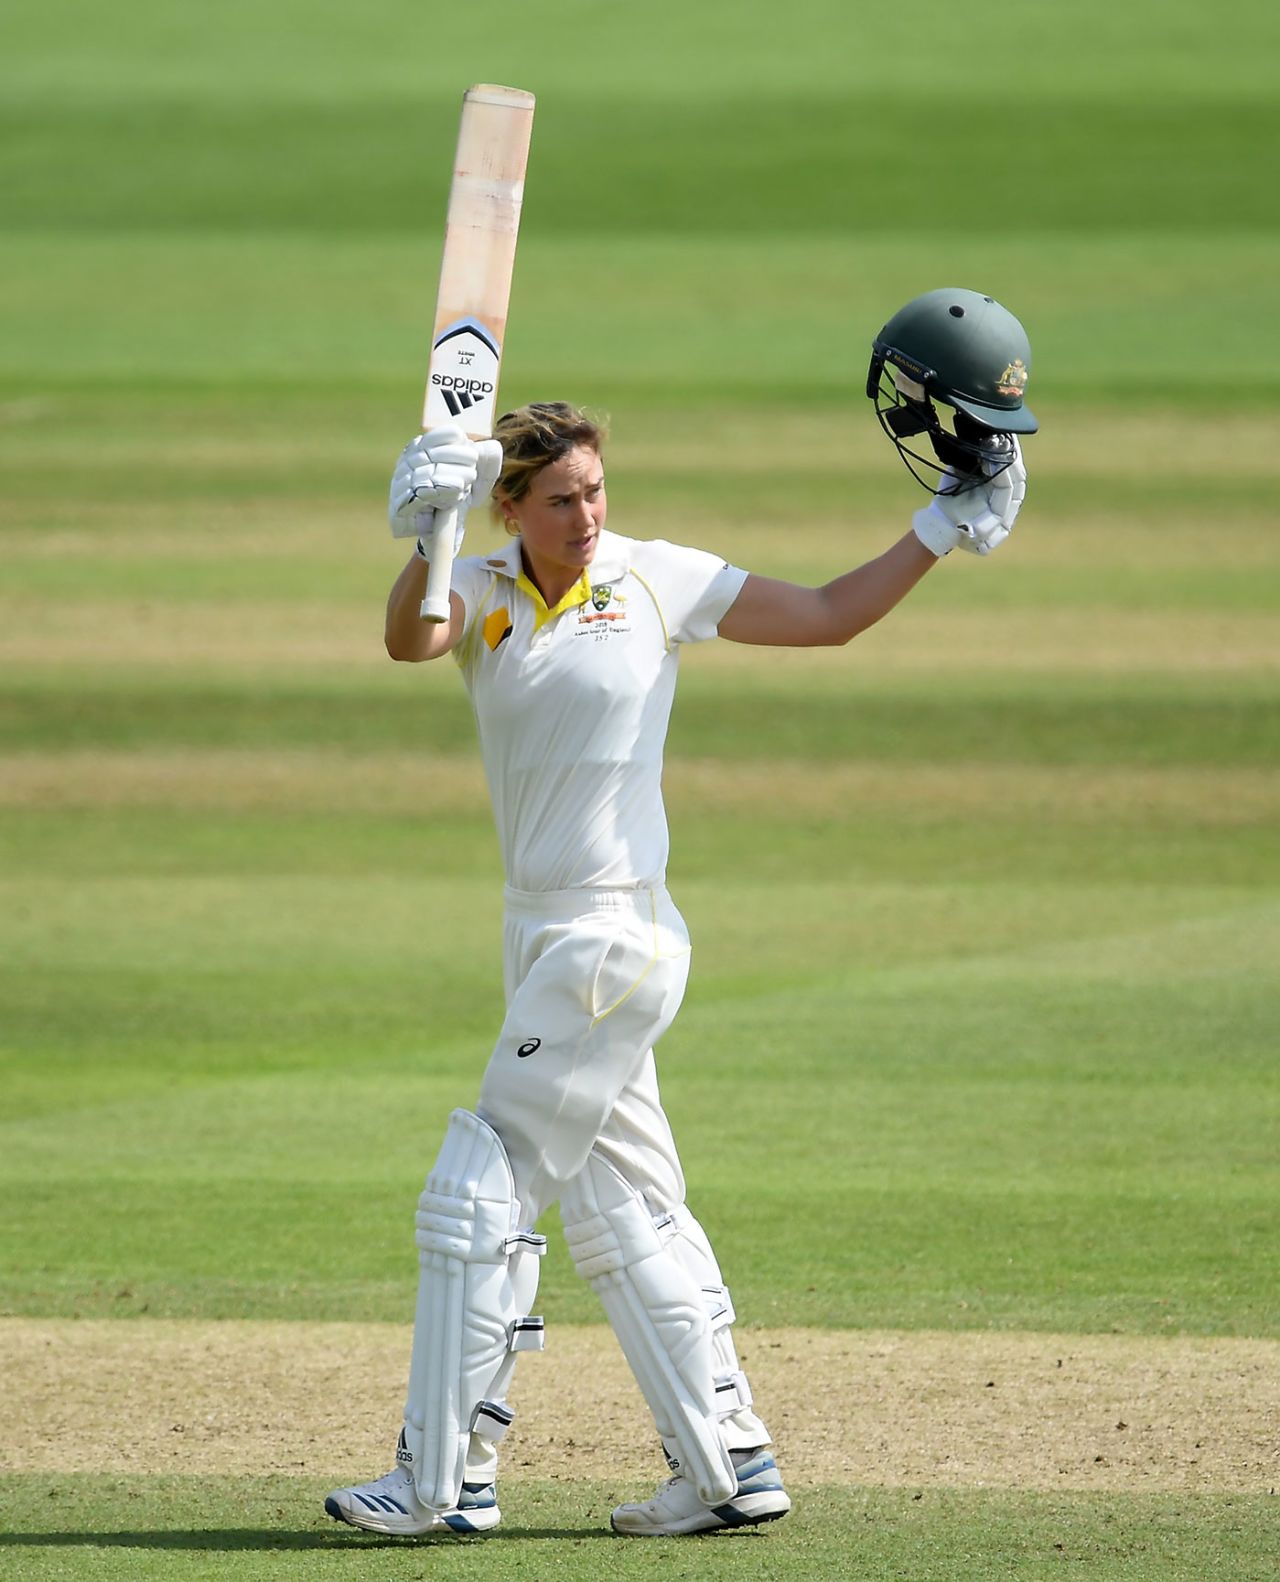 Ellyse Perry brings up her Ashes hundred, England v Australia, only women's Test, Taunton, 2nd day, July 19, 2019